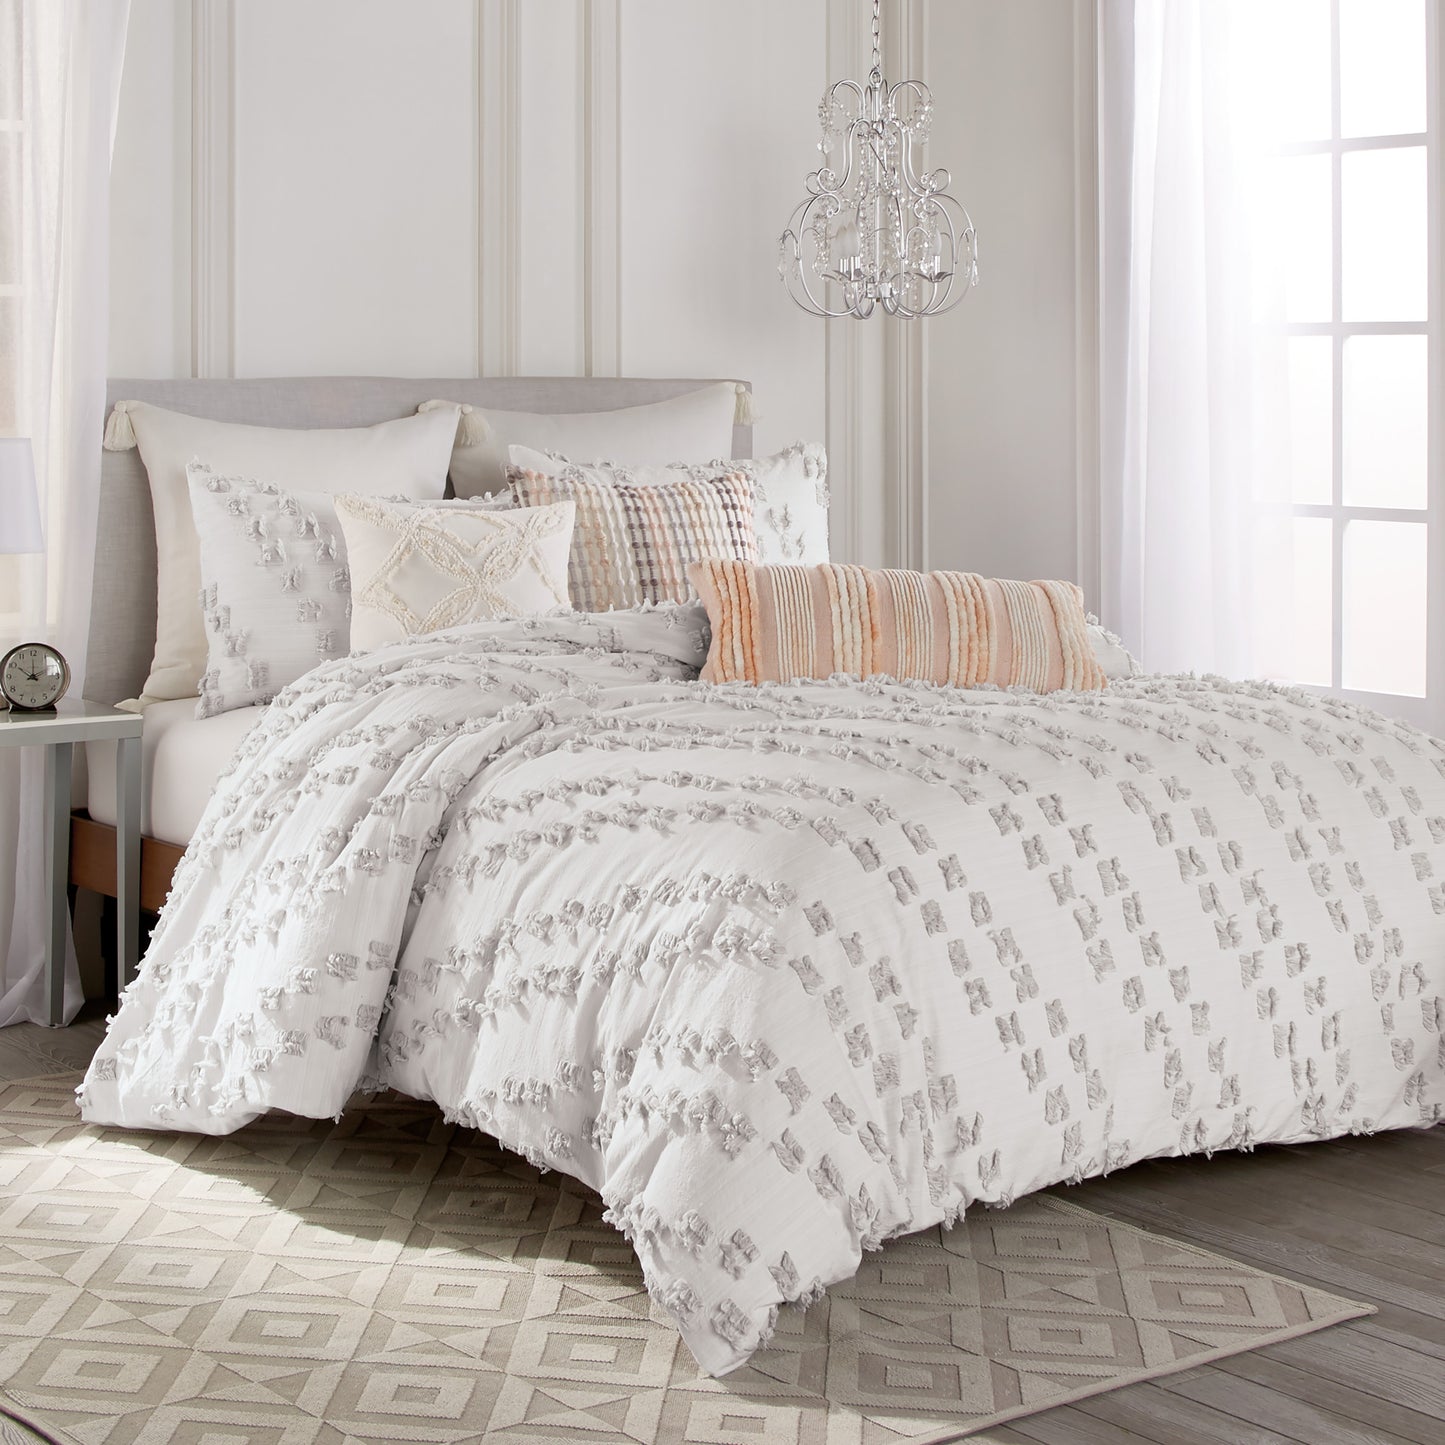 Peri Home Grey Space Dye Fringe Comforter Bedding Collection